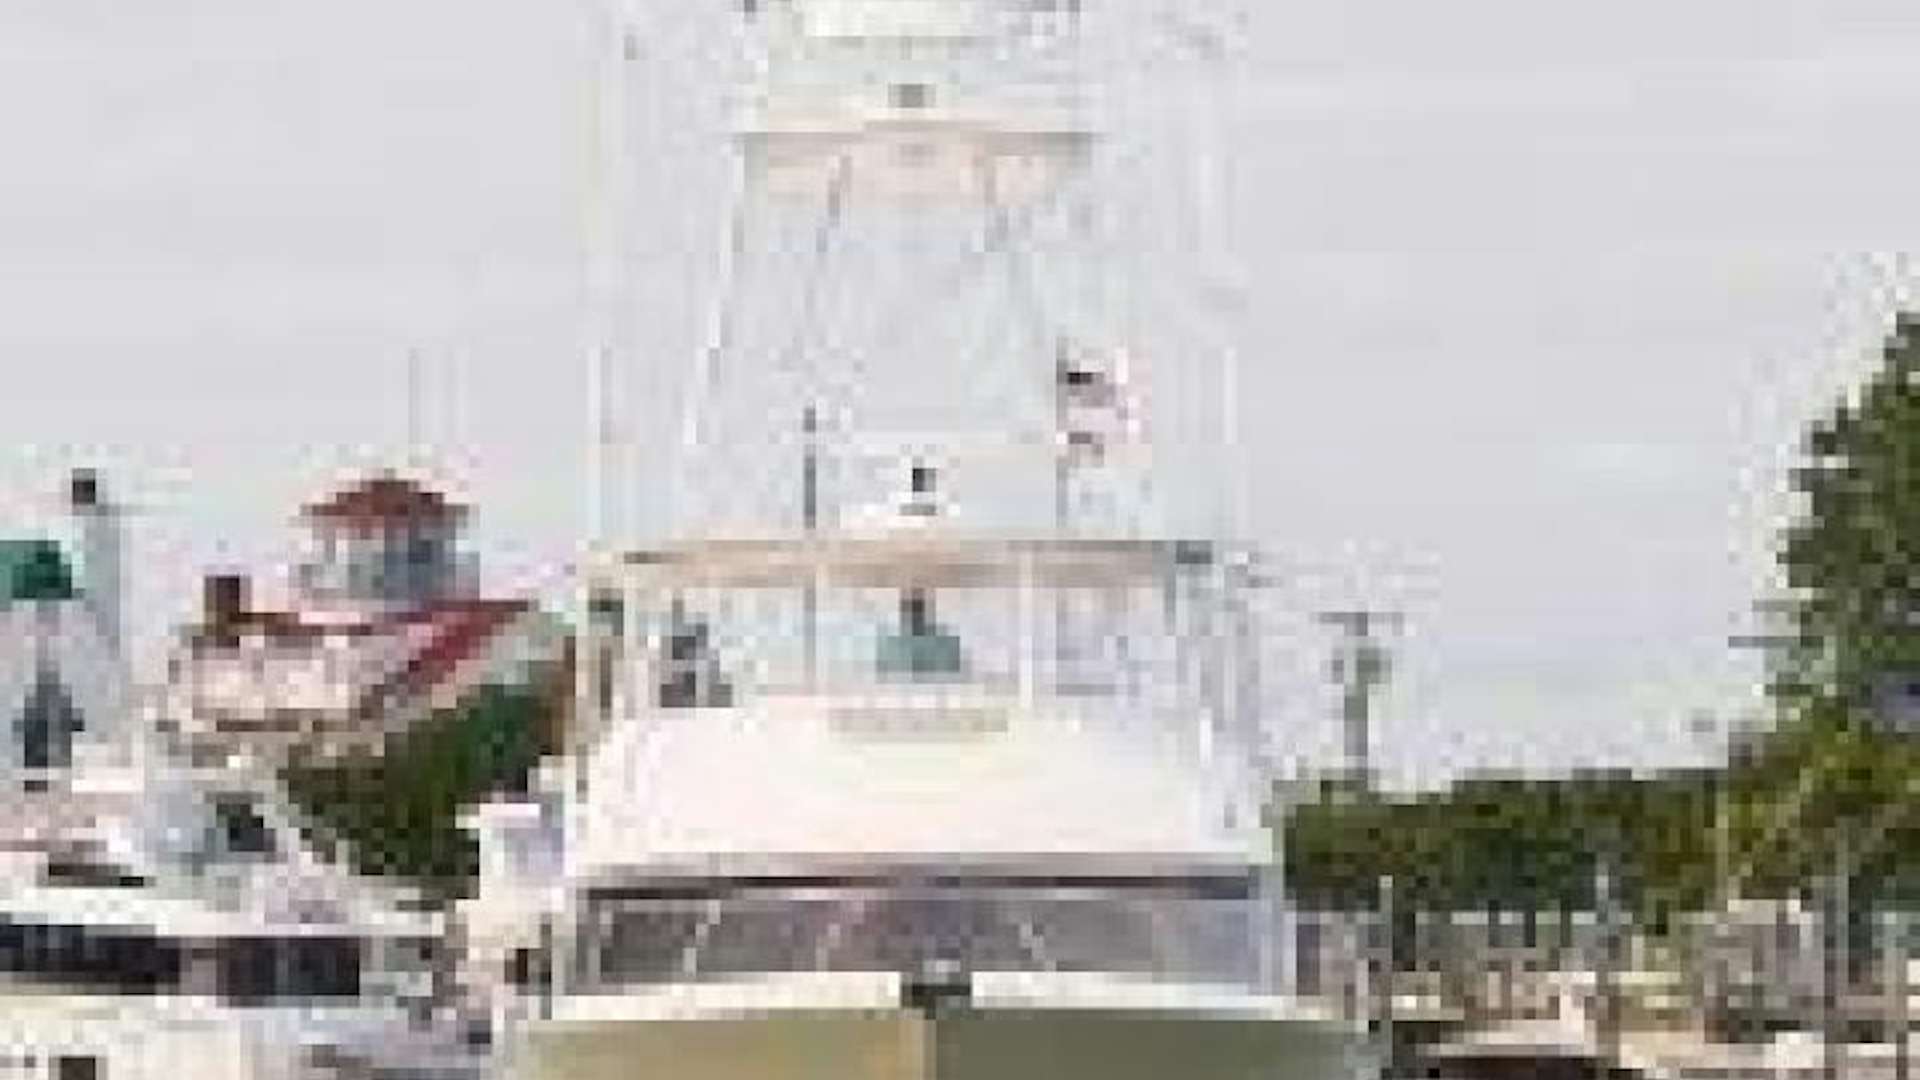 Genesis
Yacht for Sale